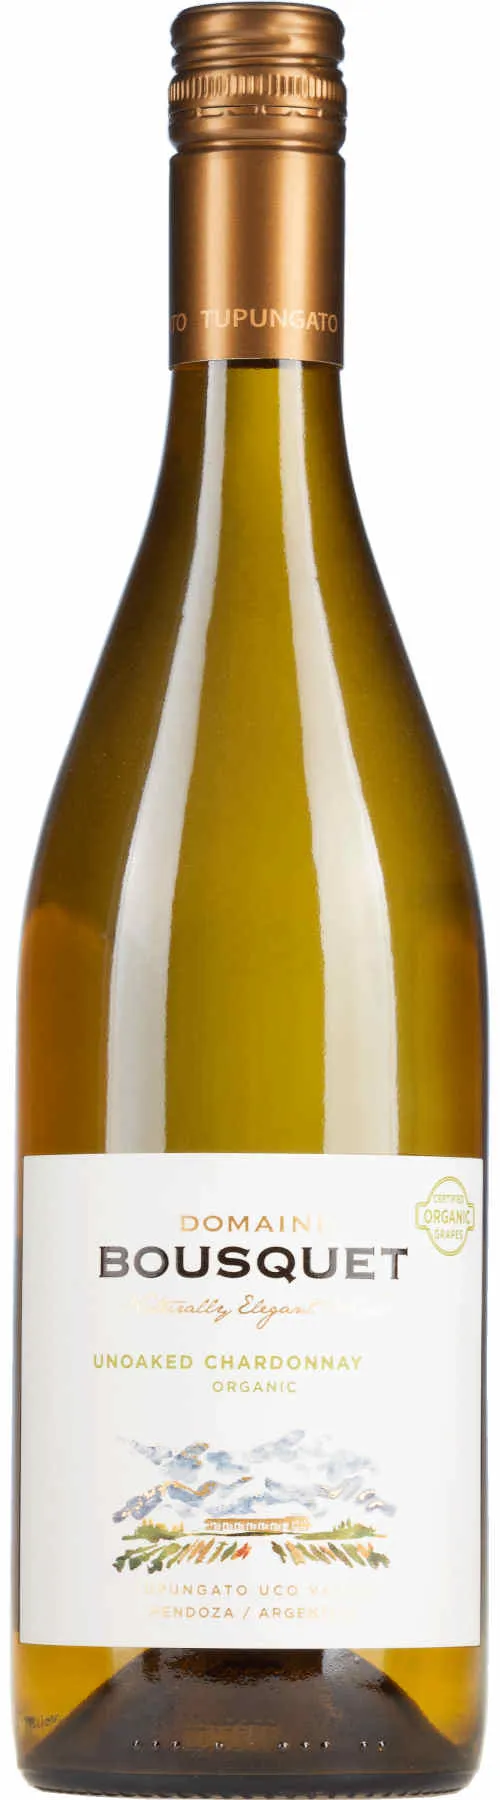 Bottle of Domaine Bousquet Chardonnay from search results